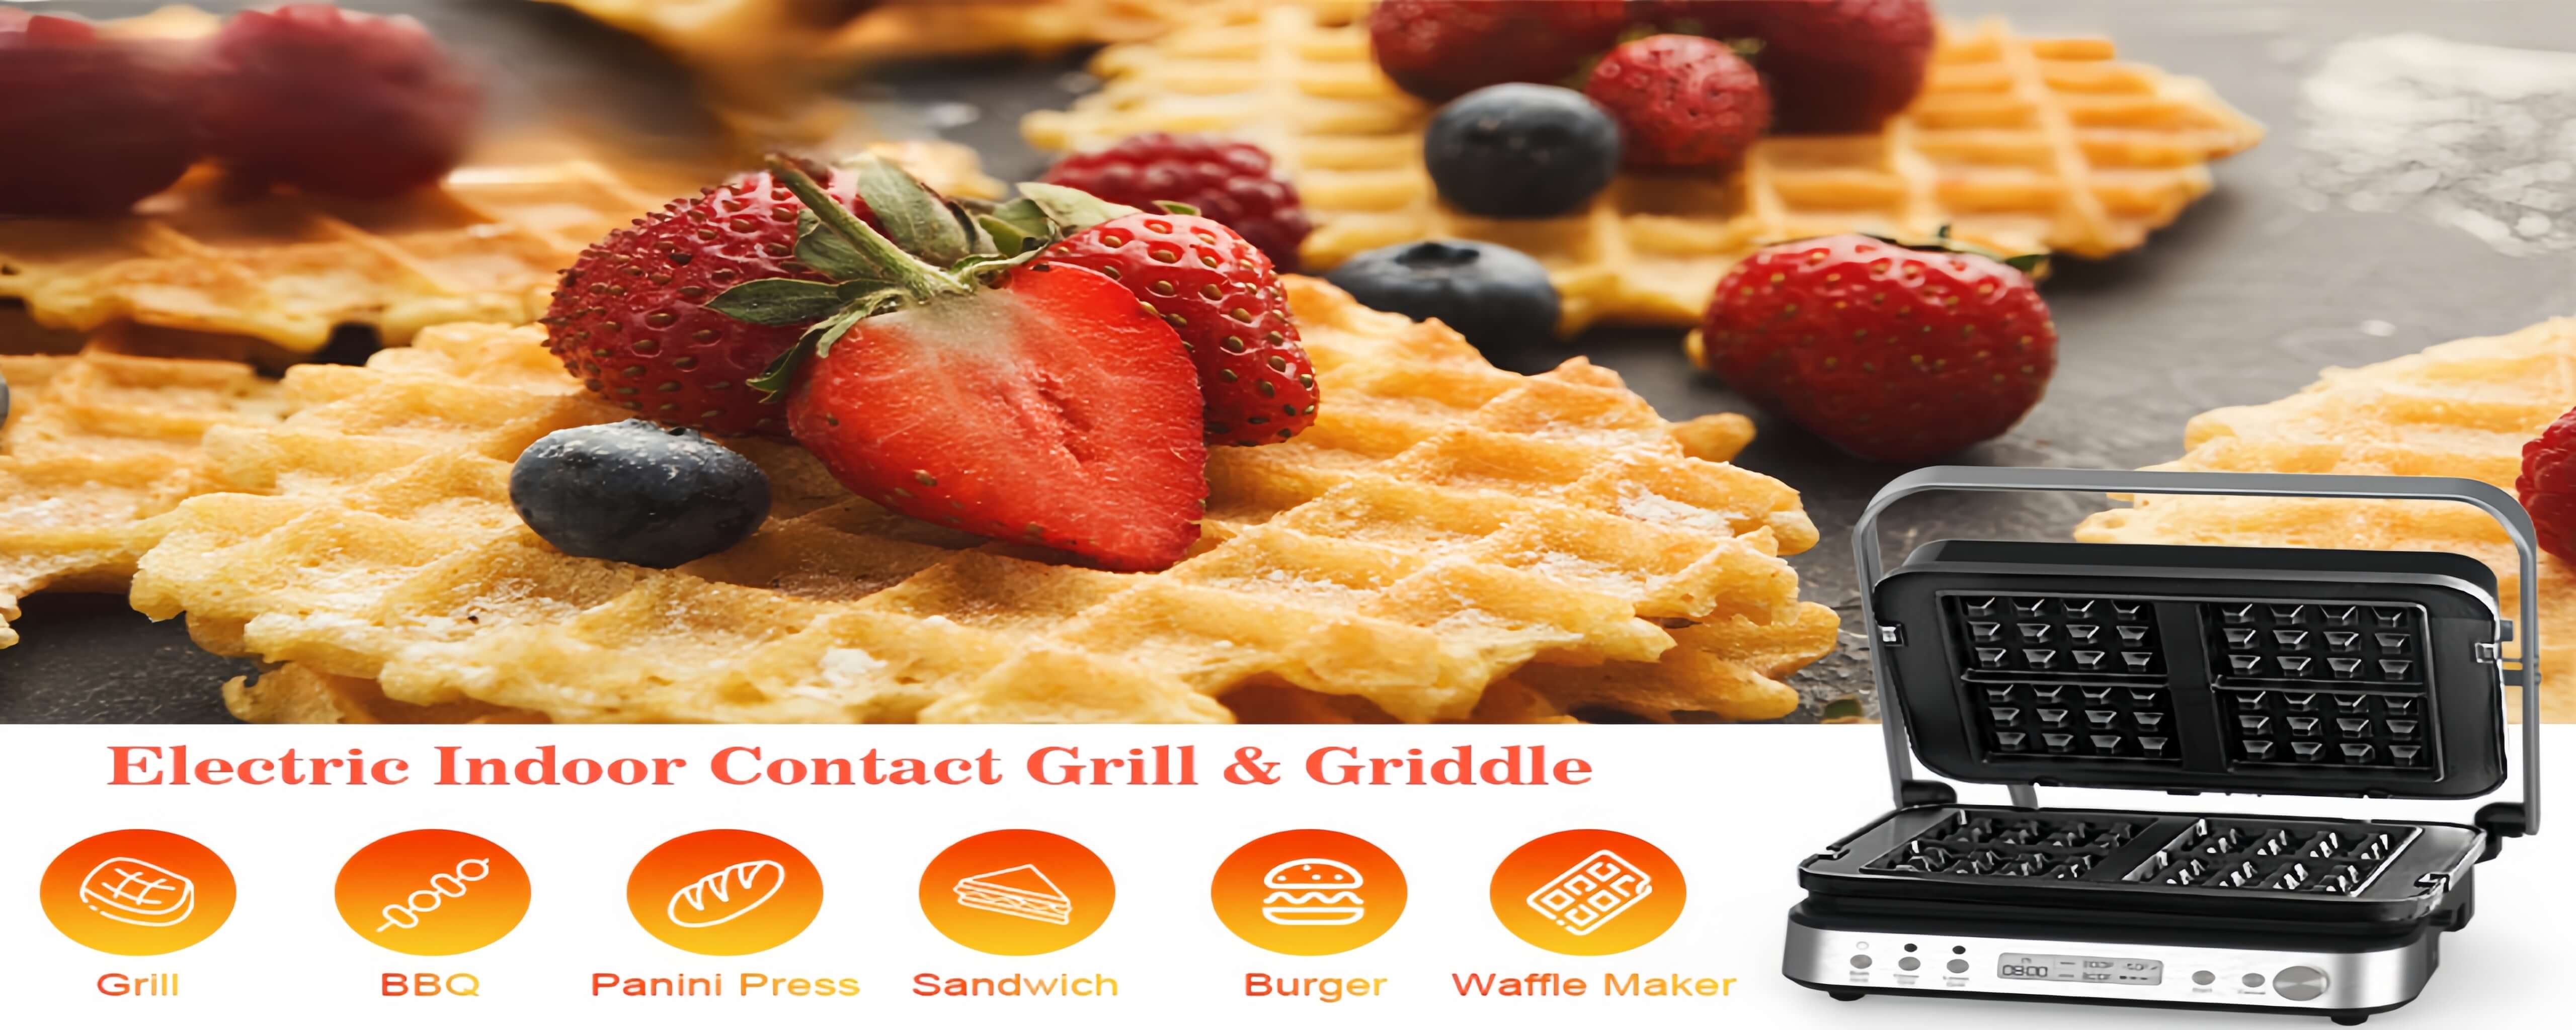 Contact Grill and Griddle